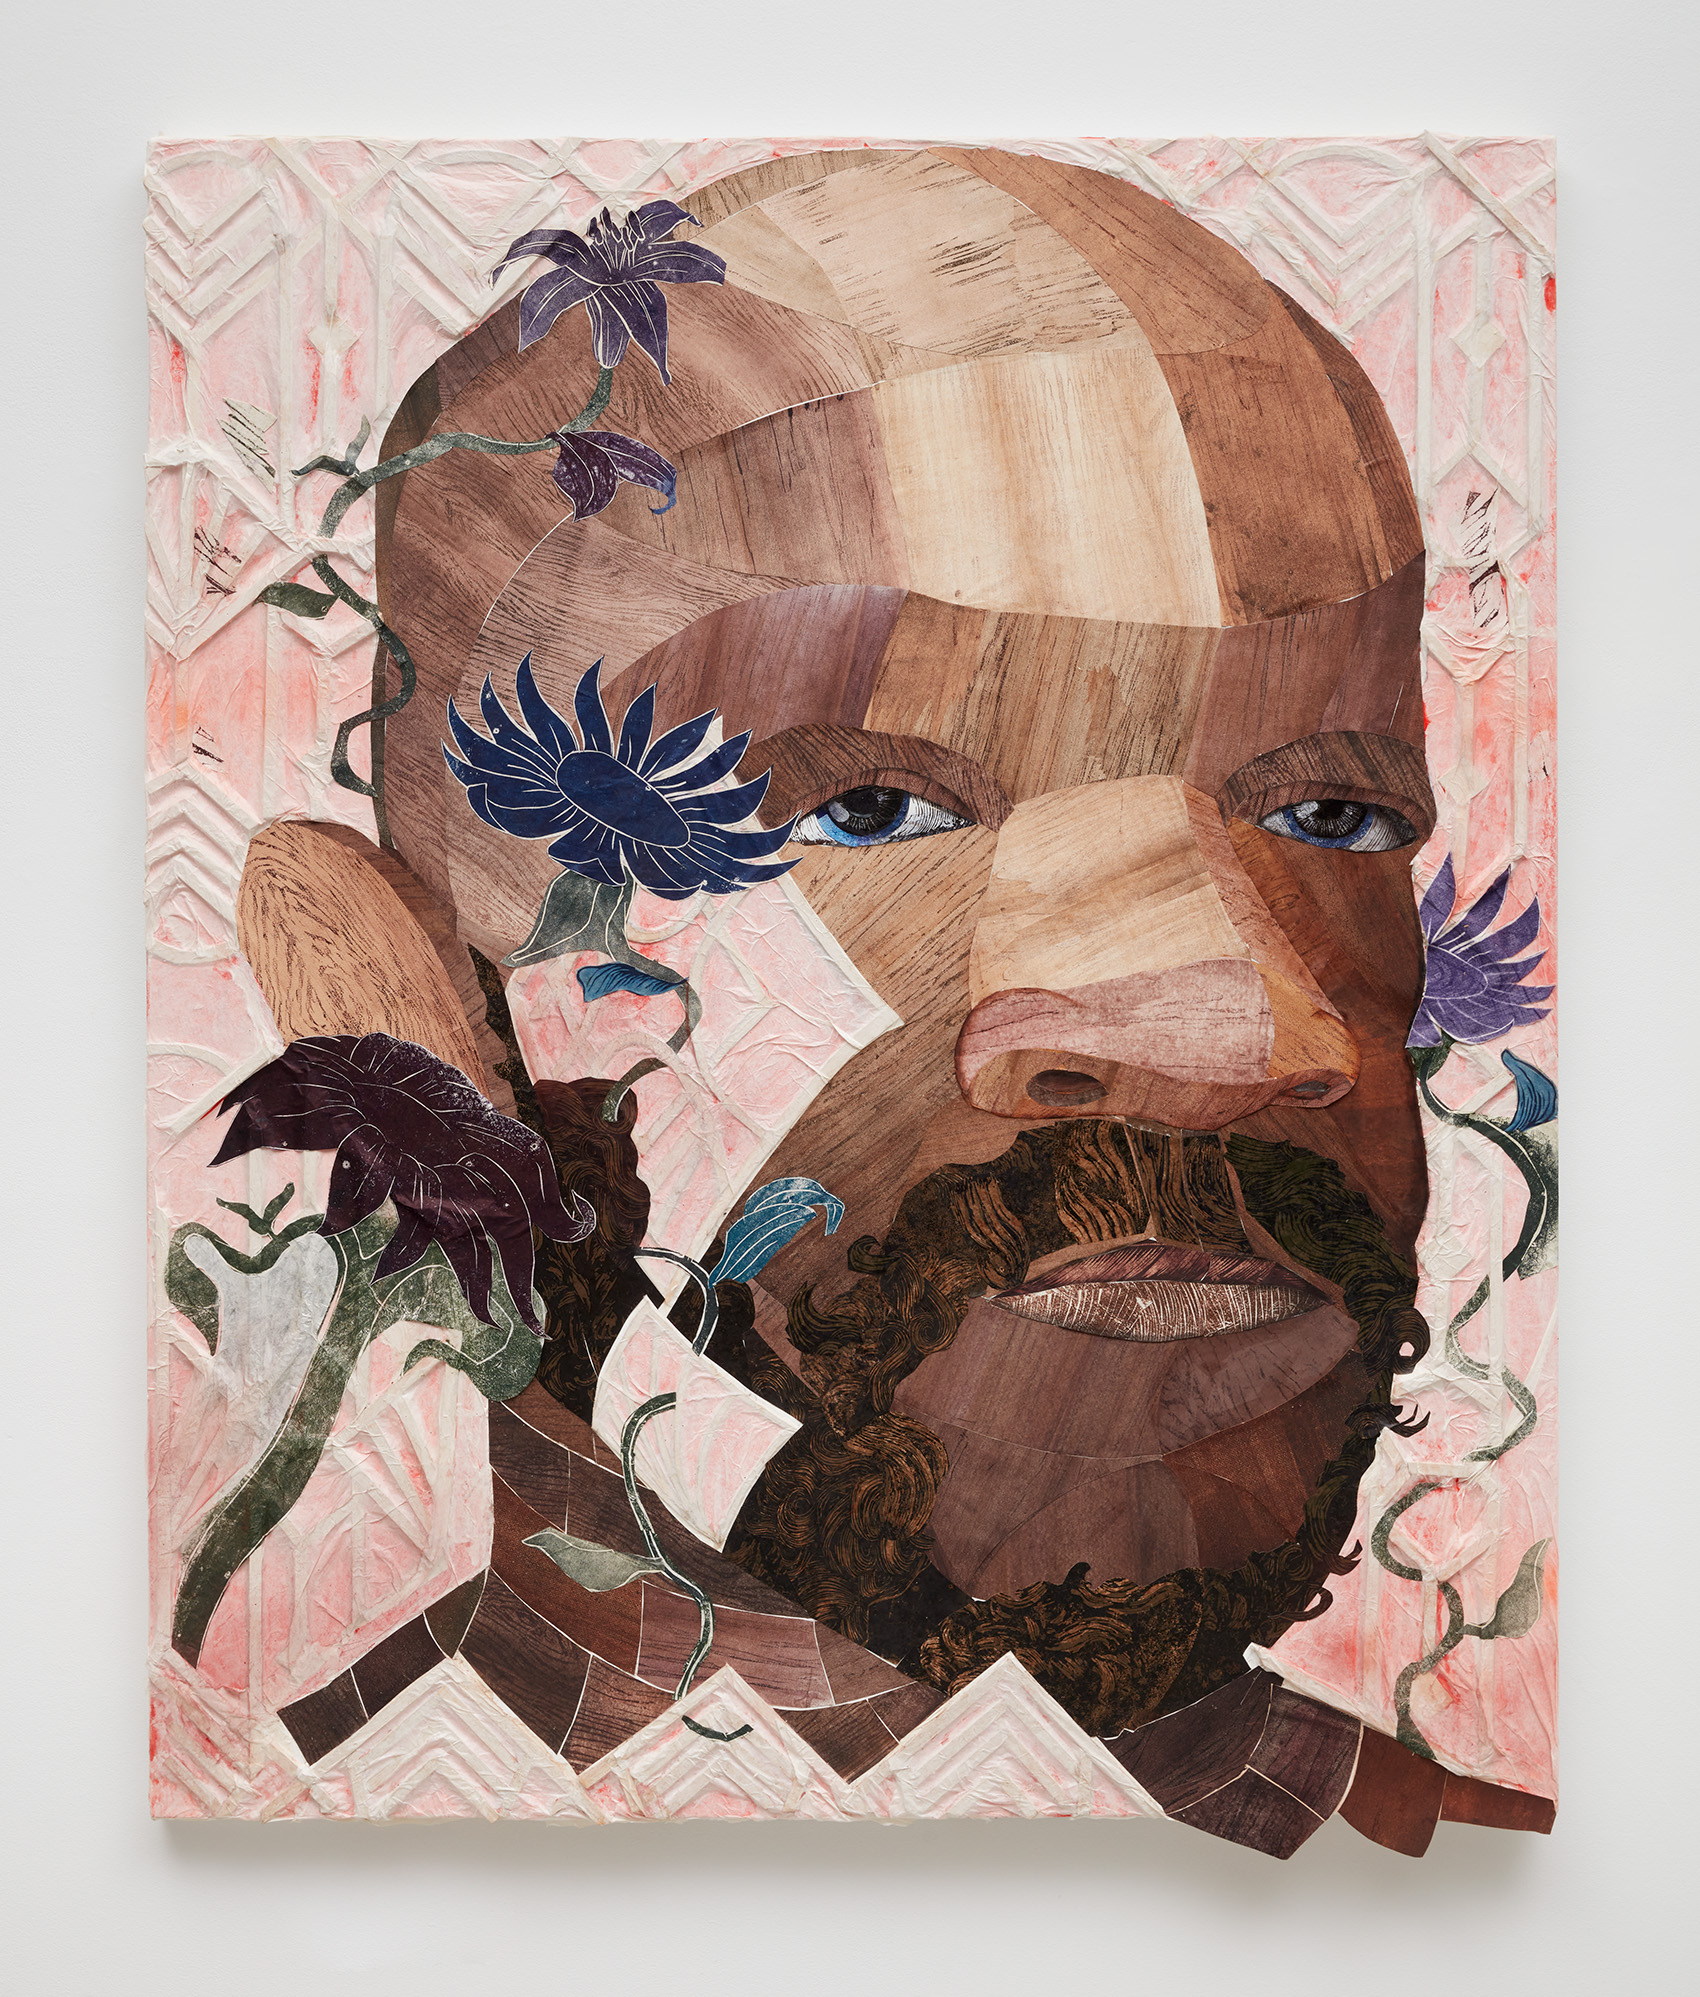 Collage portrait of a Black man with flowers next to his head